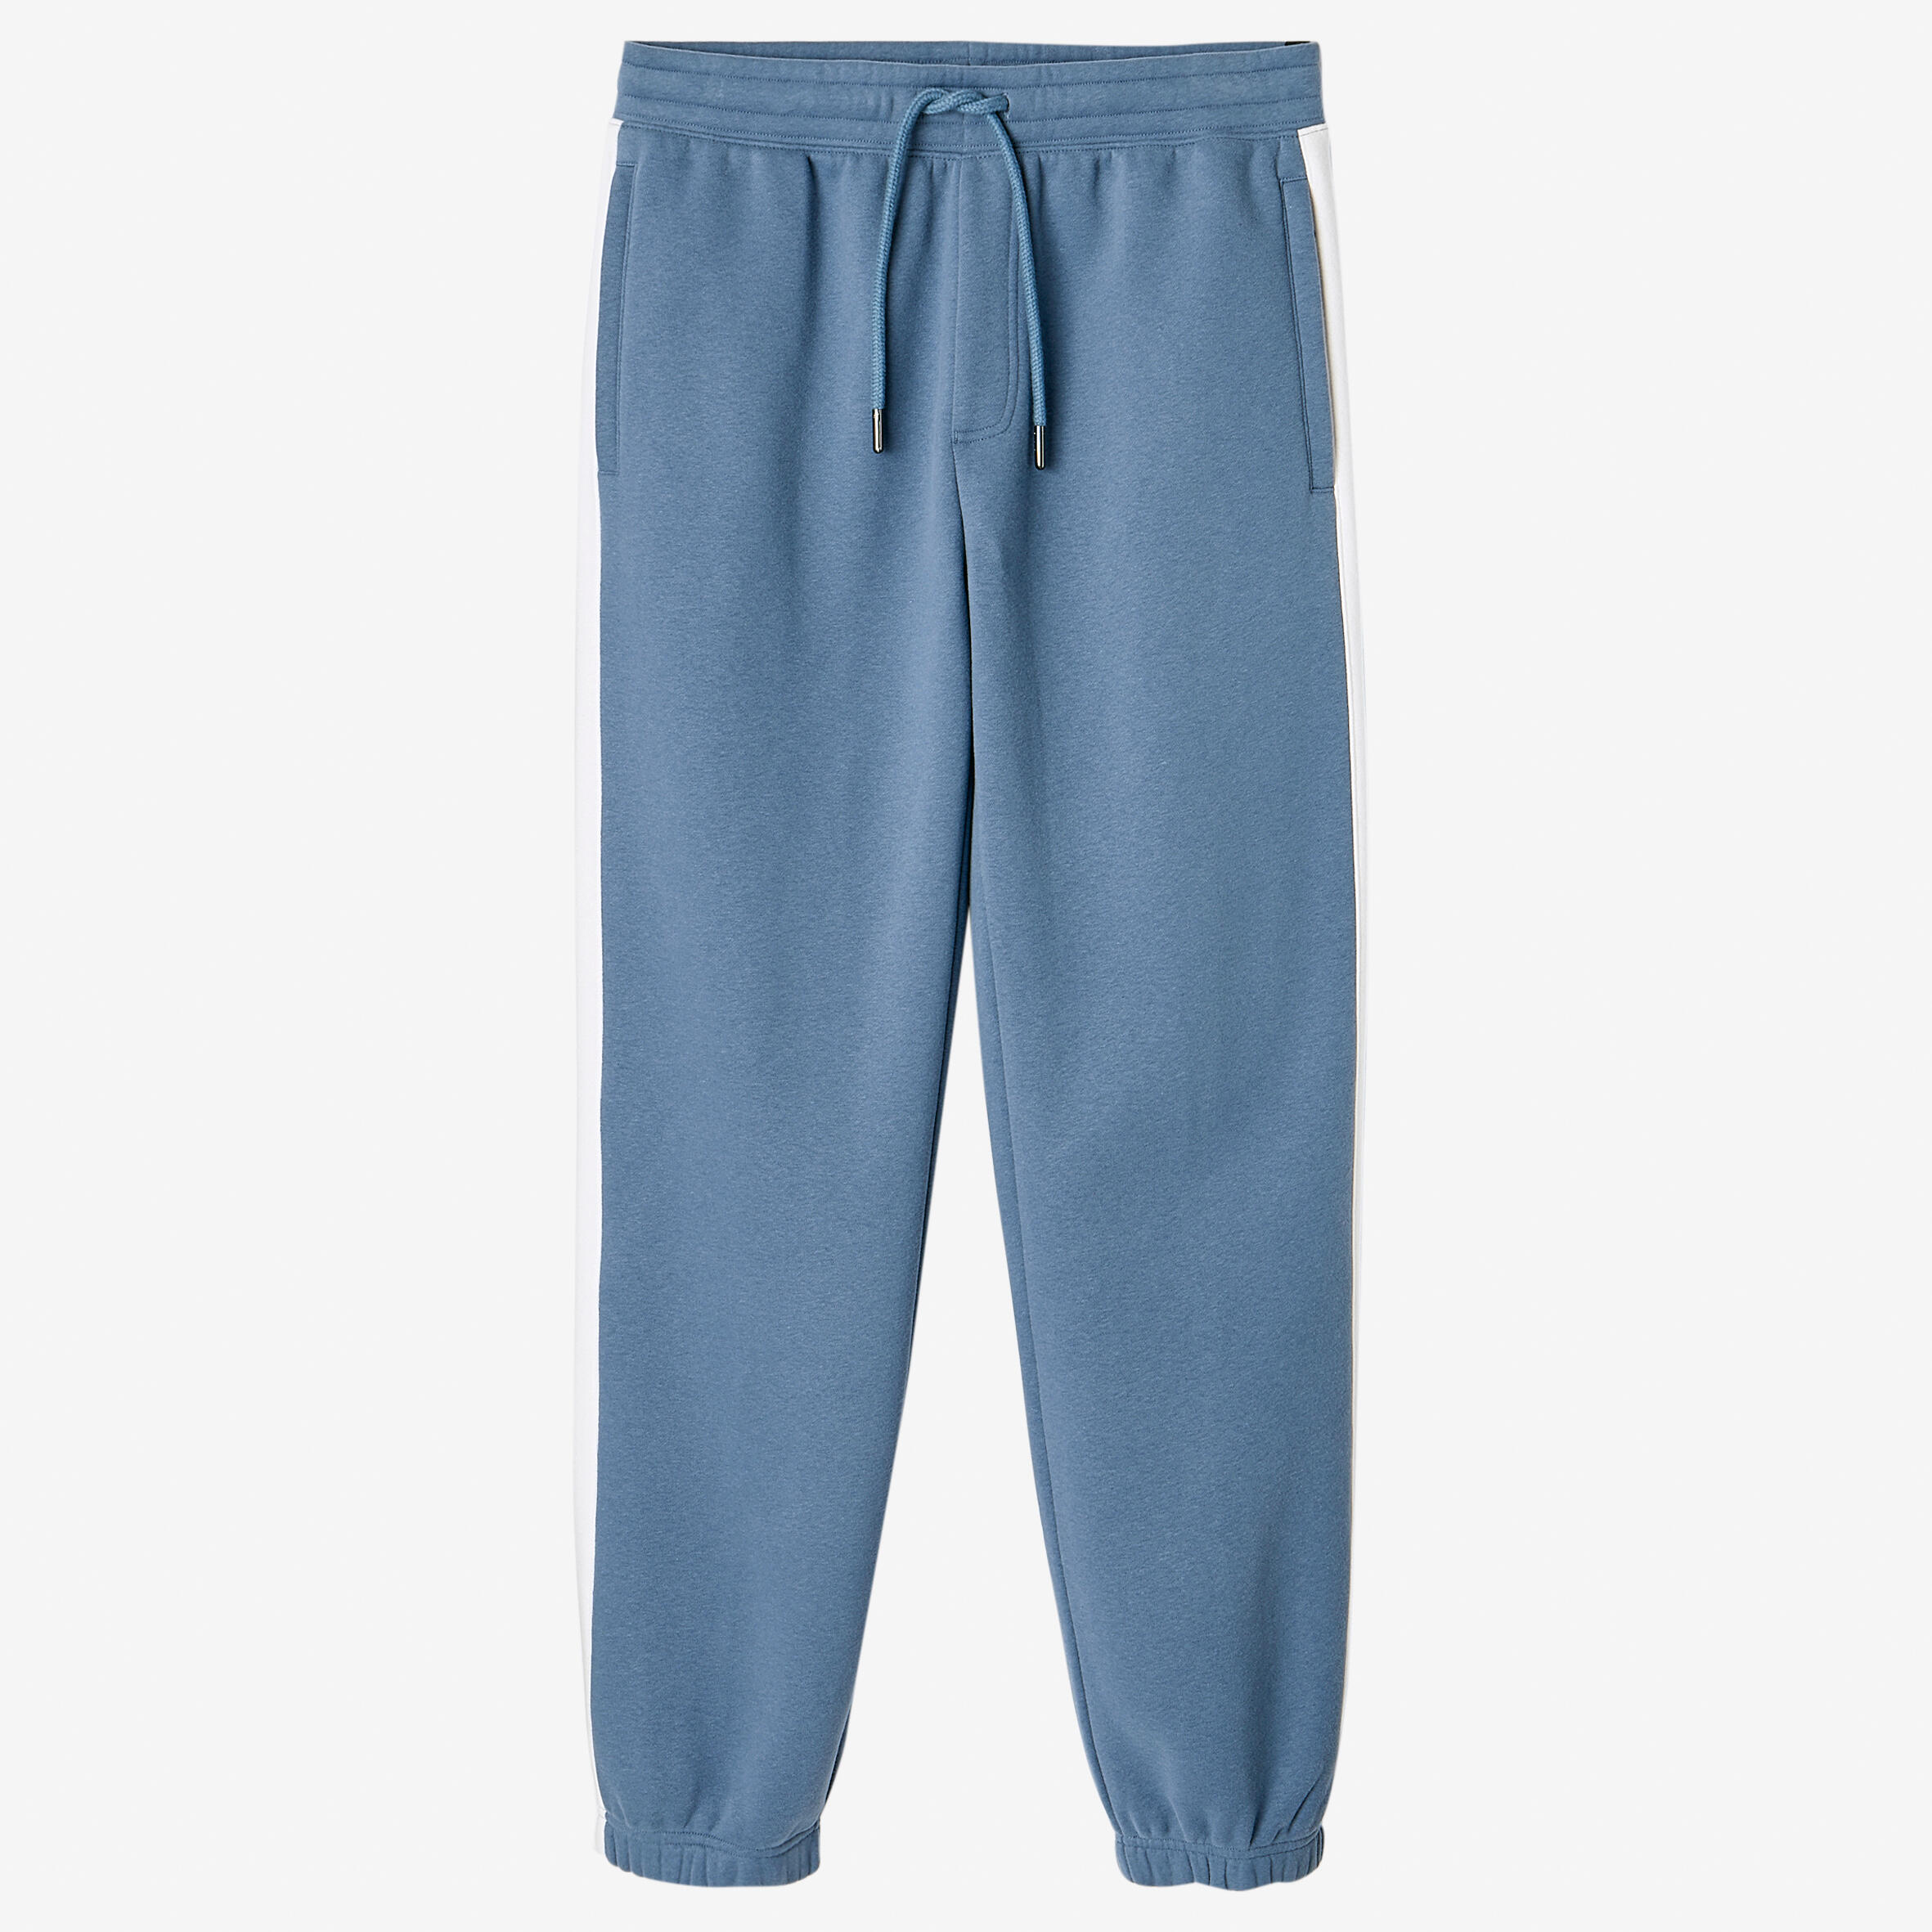 Men's Fitness Synthetic Straight-Cut Jogging Bottoms - Storm Blue 8/8